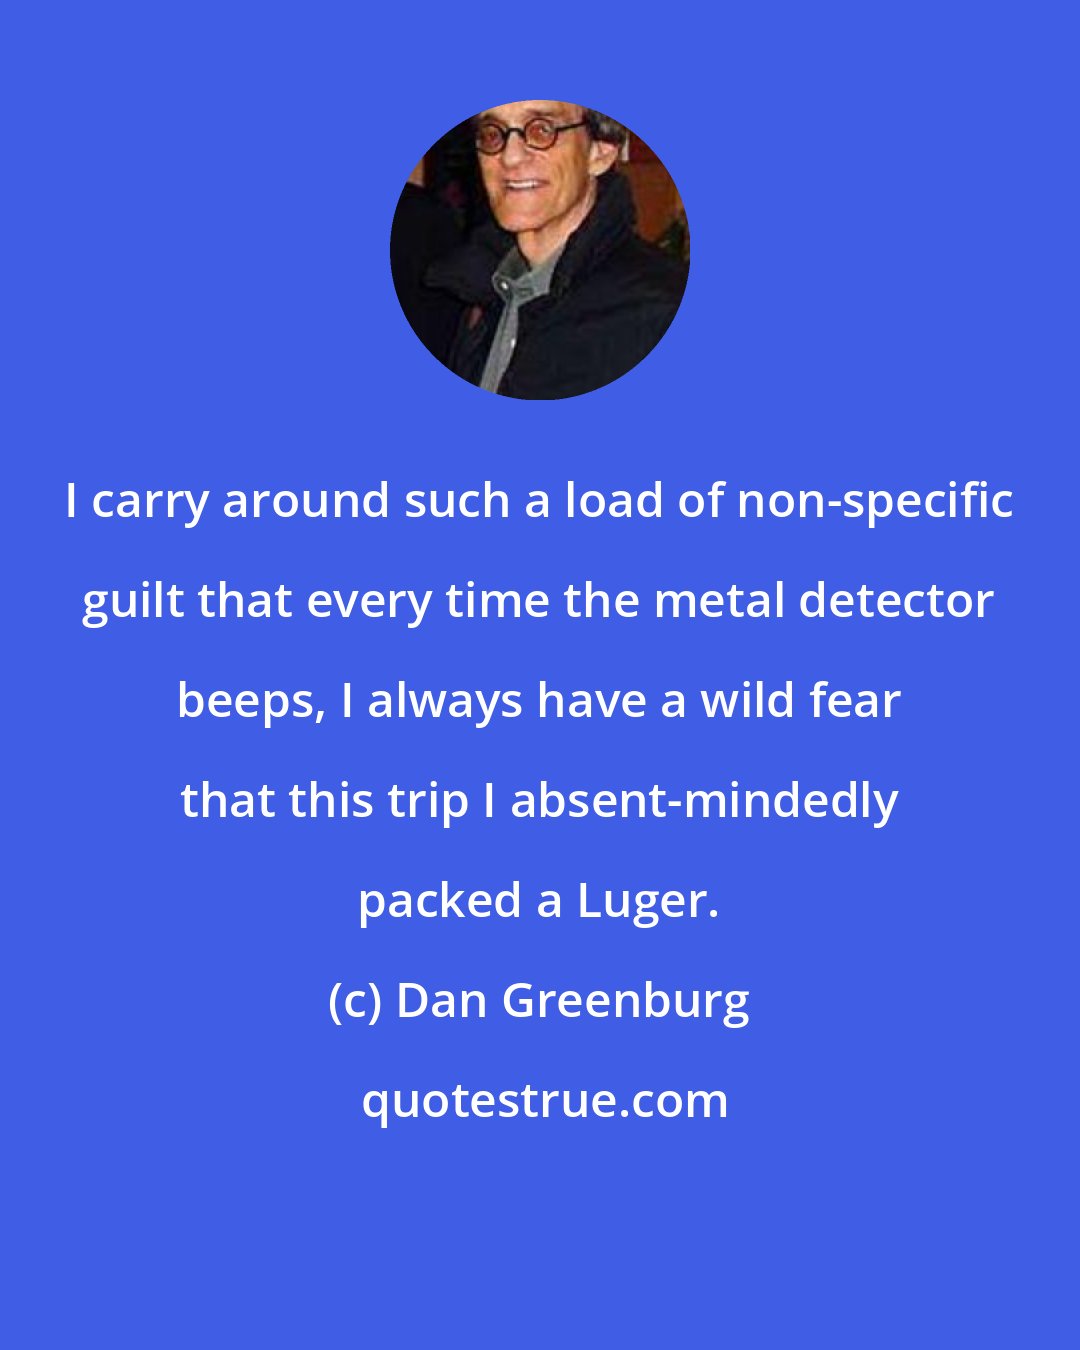 Dan Greenburg: I carry around such a load of non-specific guilt that every time the metal detector beeps, I always have a wild fear that this trip I absent-mindedly packed a Luger.